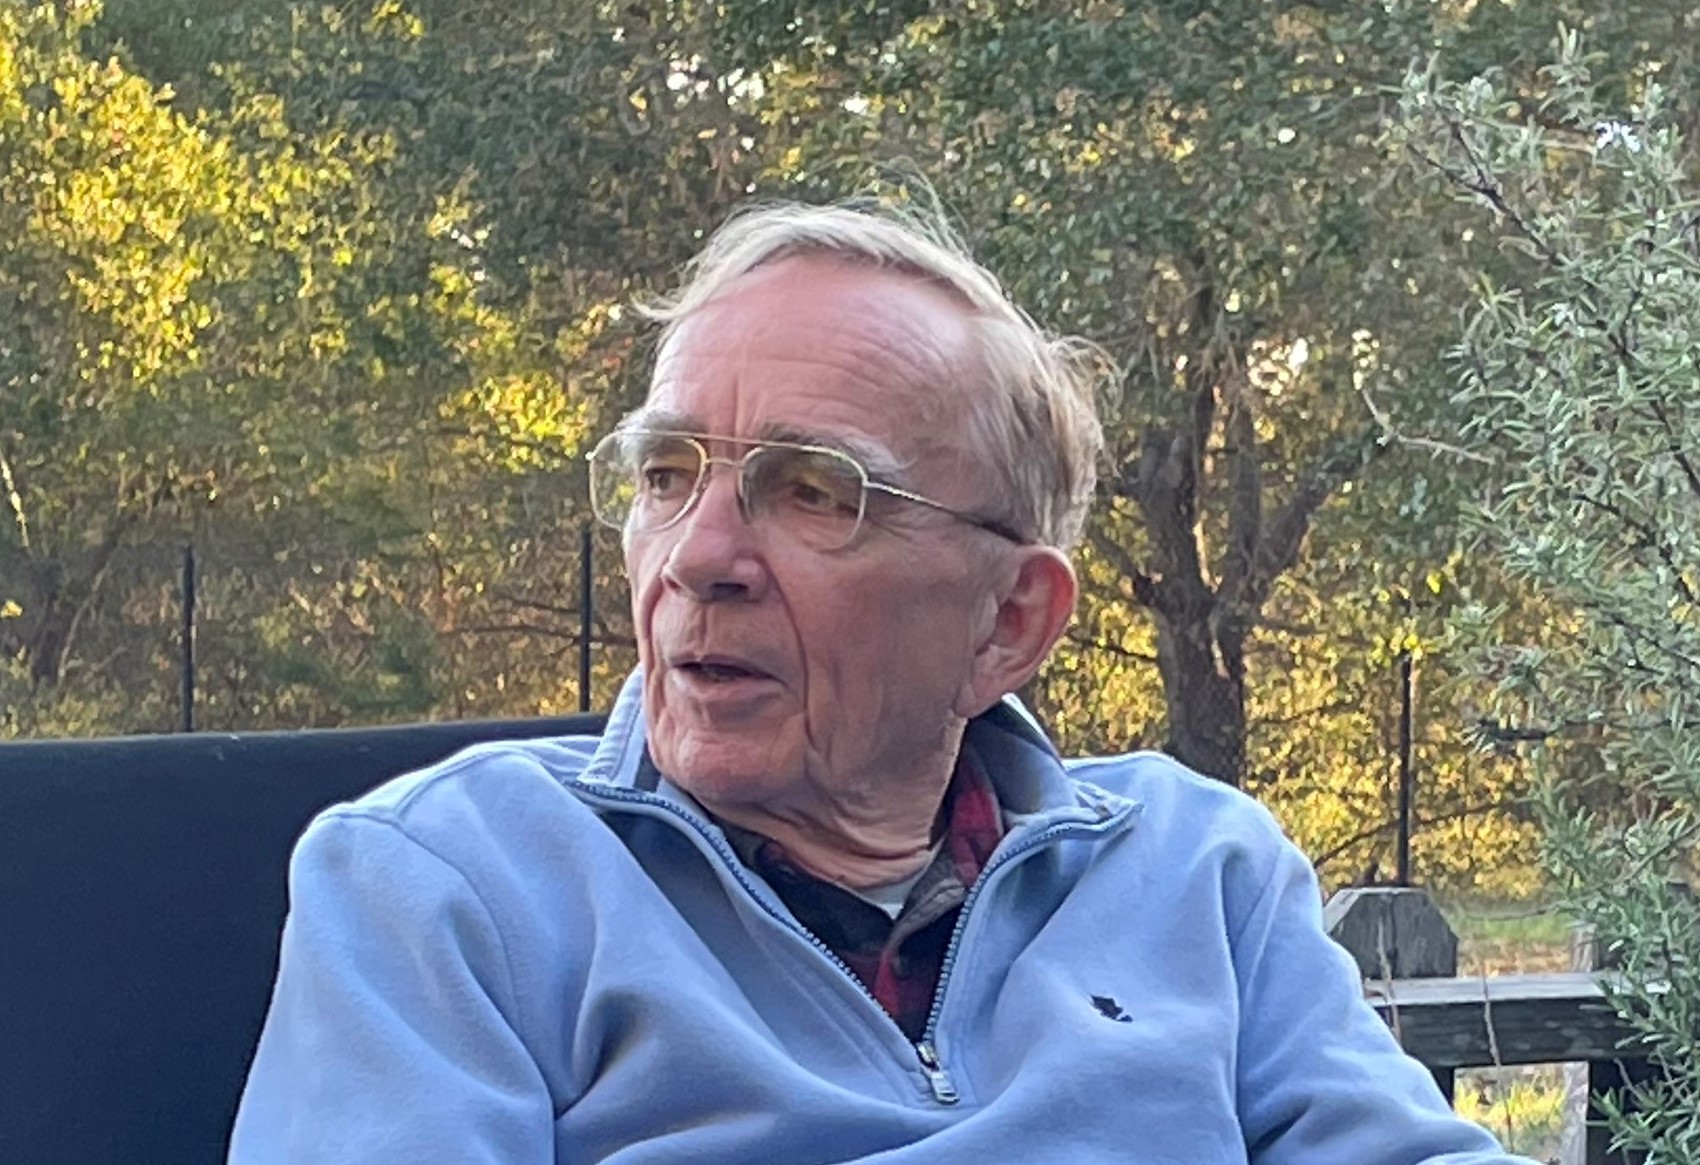 Dr. Eaton in a blue sweatshirt and gold glasses sitting. He is engaged in conversation and trees fill the background.